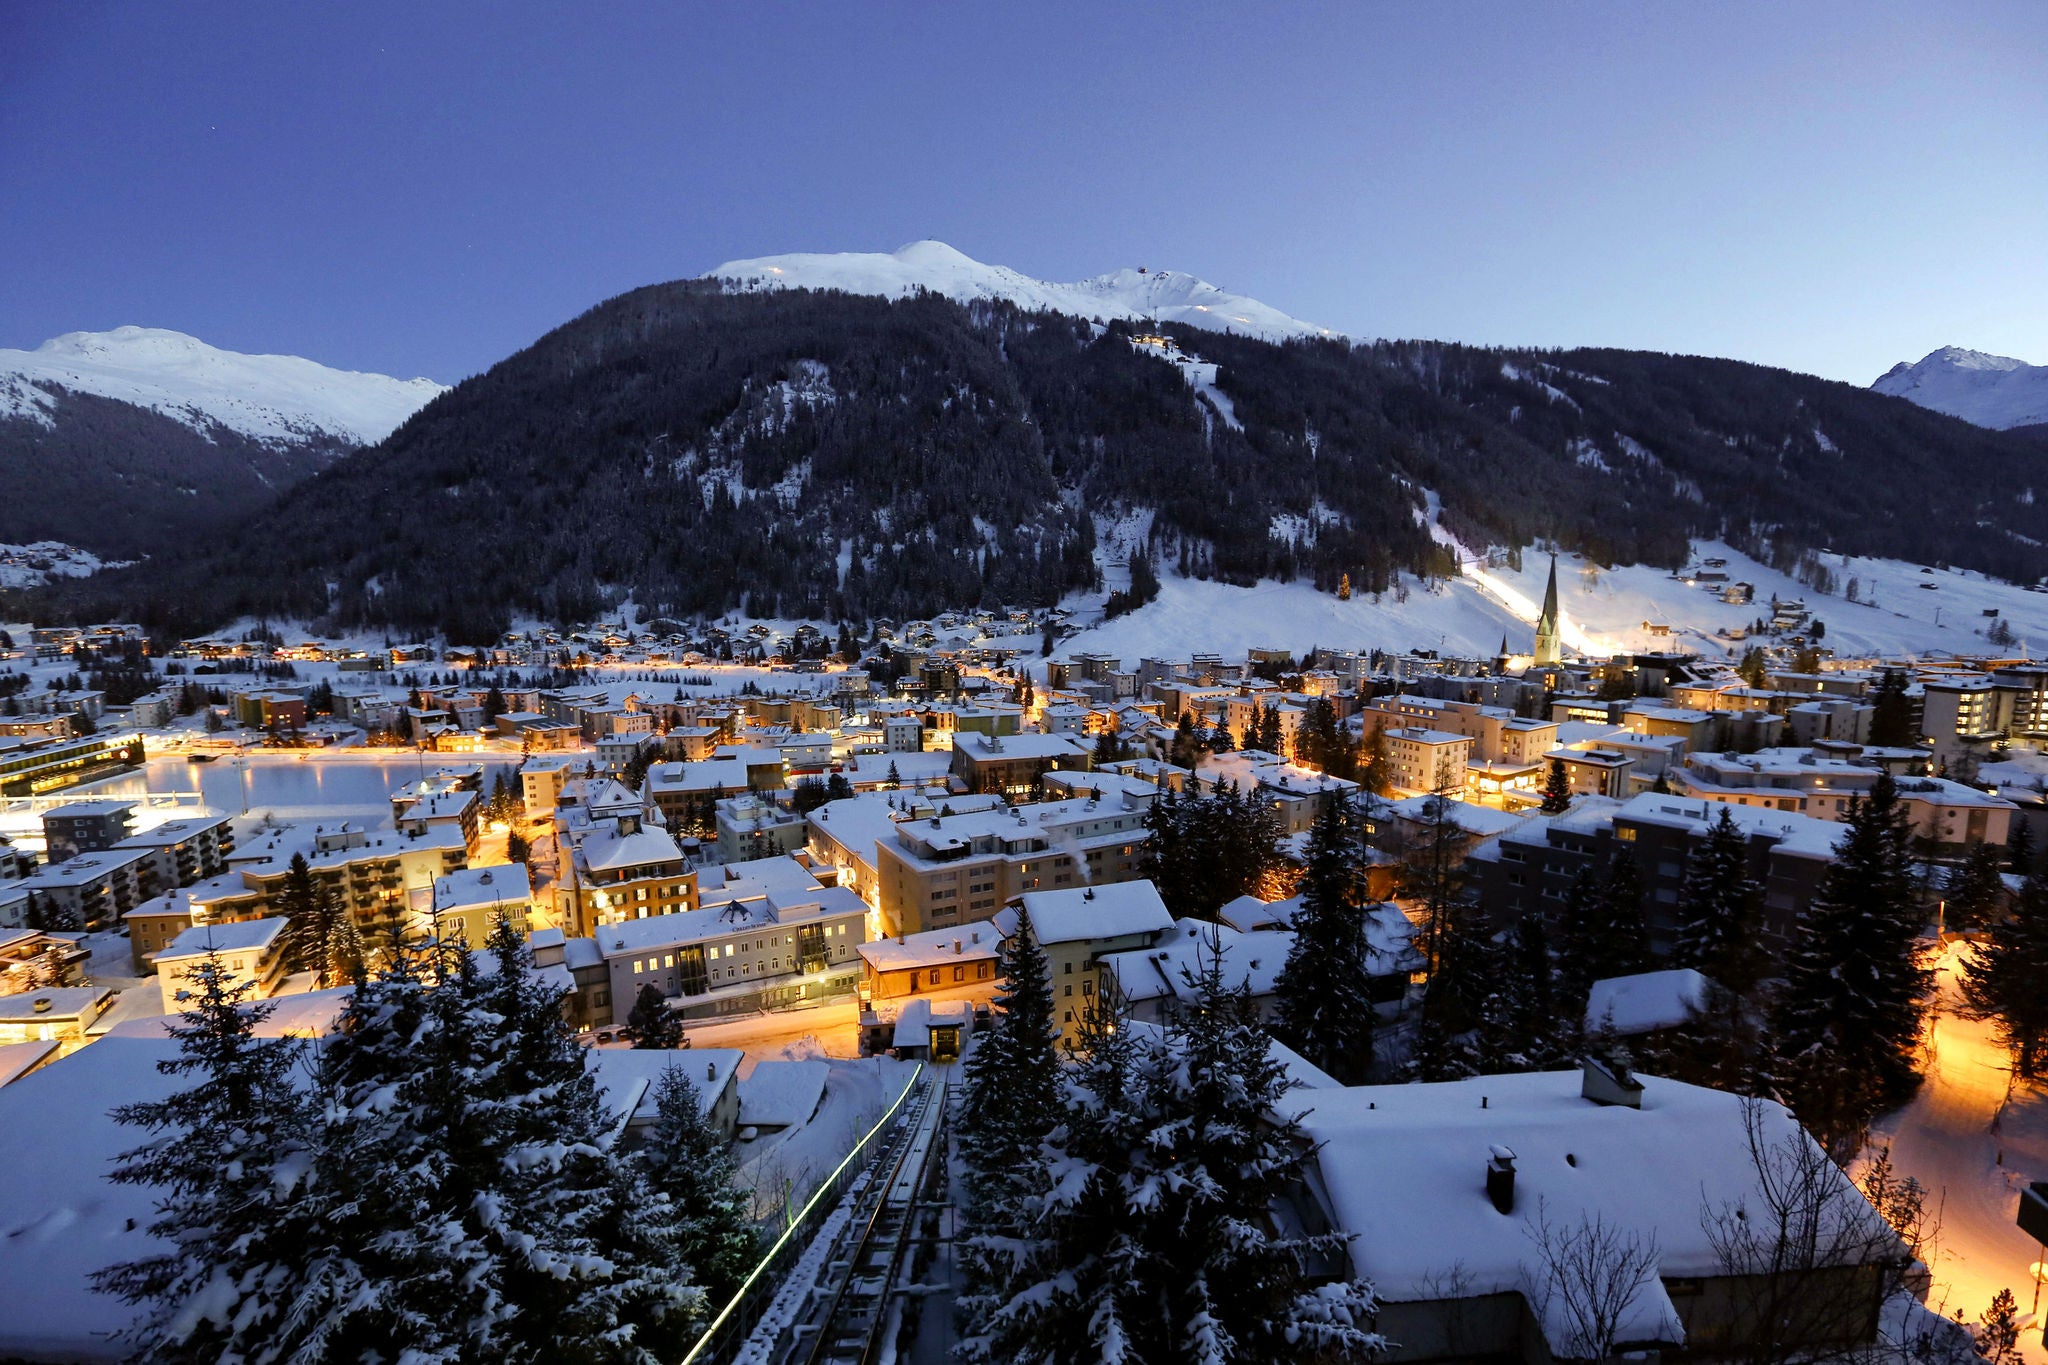 Snow covered buildings are seen at dusk from the Schatzalp area above the town of Davos, Switzerland. Photographer